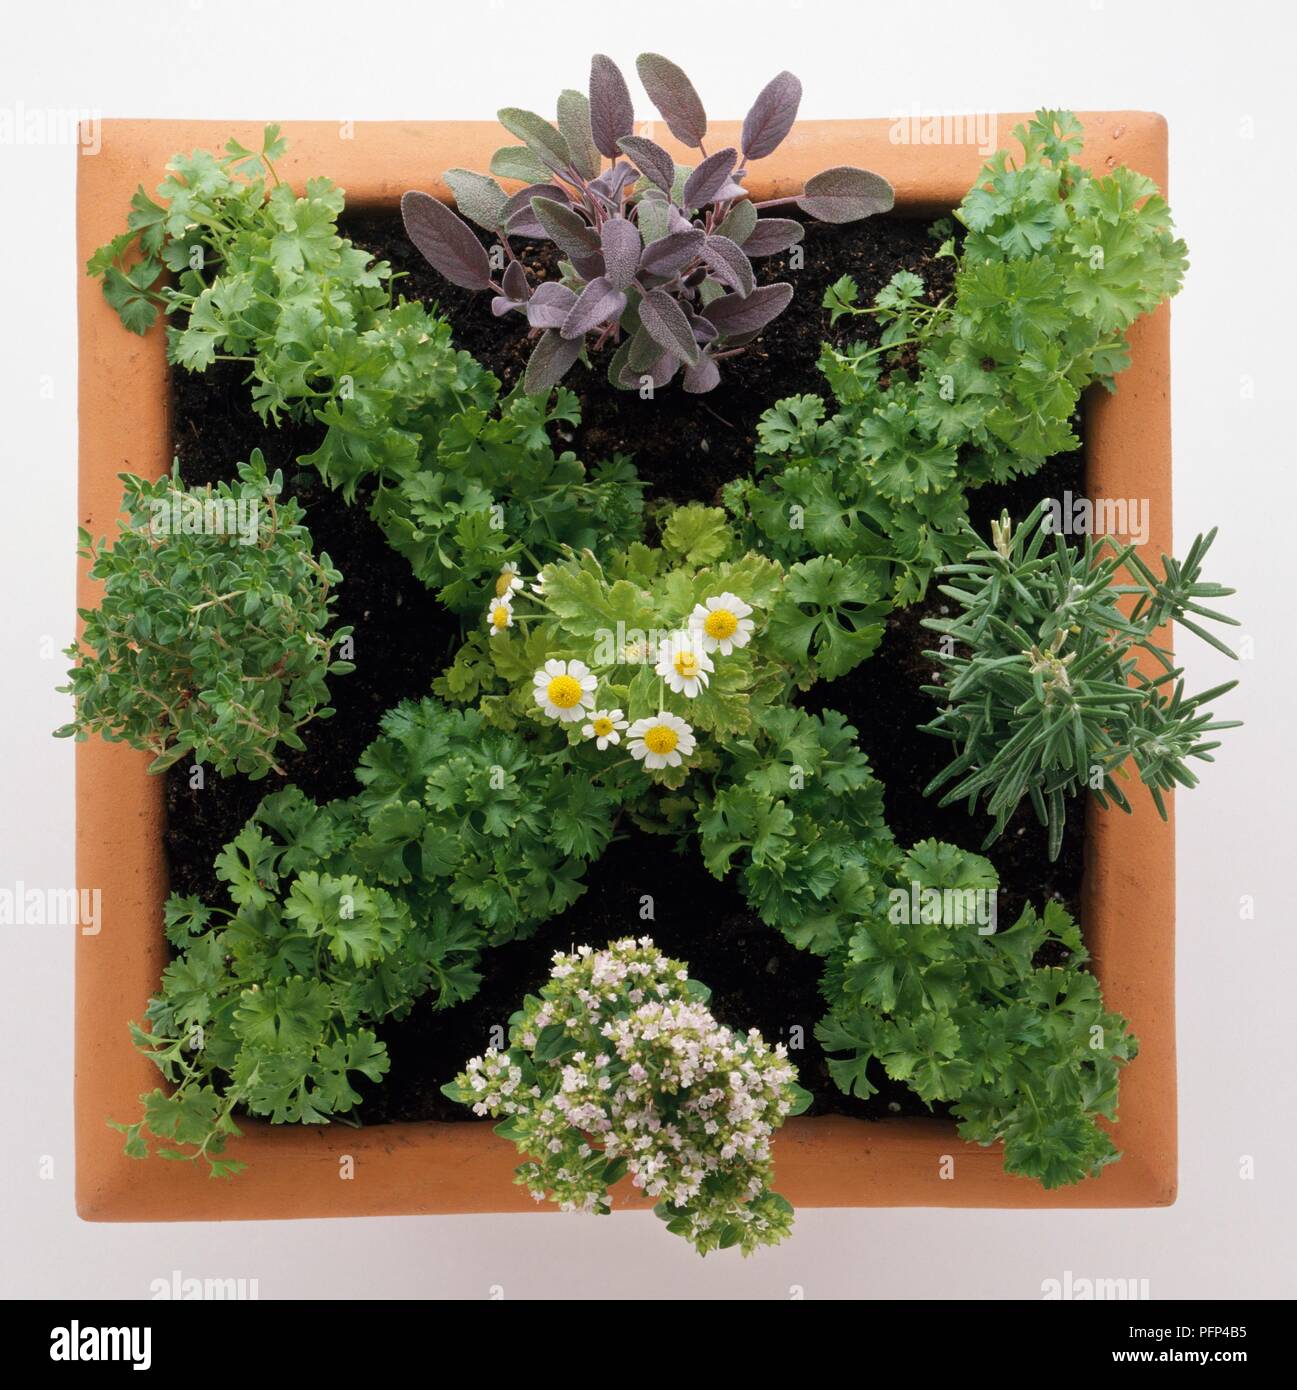 A terracotta, square container planted with herbs arranged in a mini knot design Stock Photo